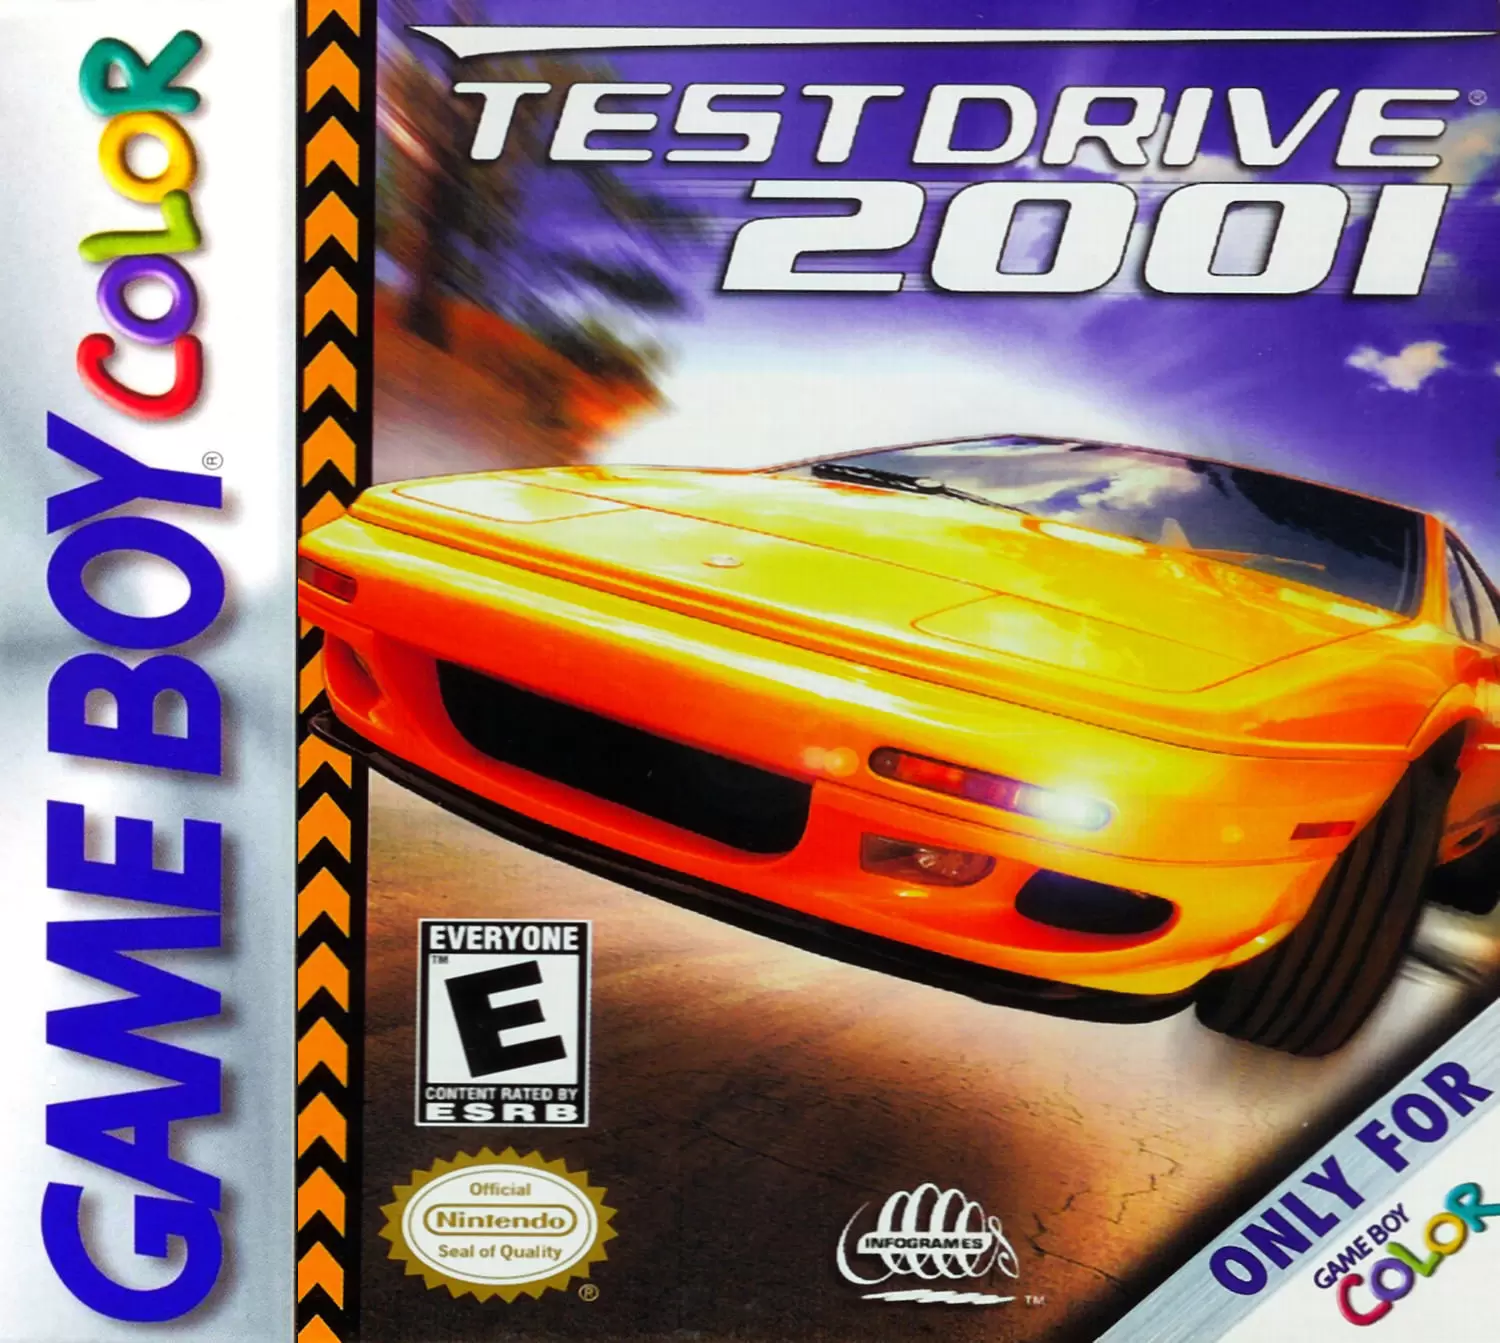 Game Boy Color Games - Test Drive 2001